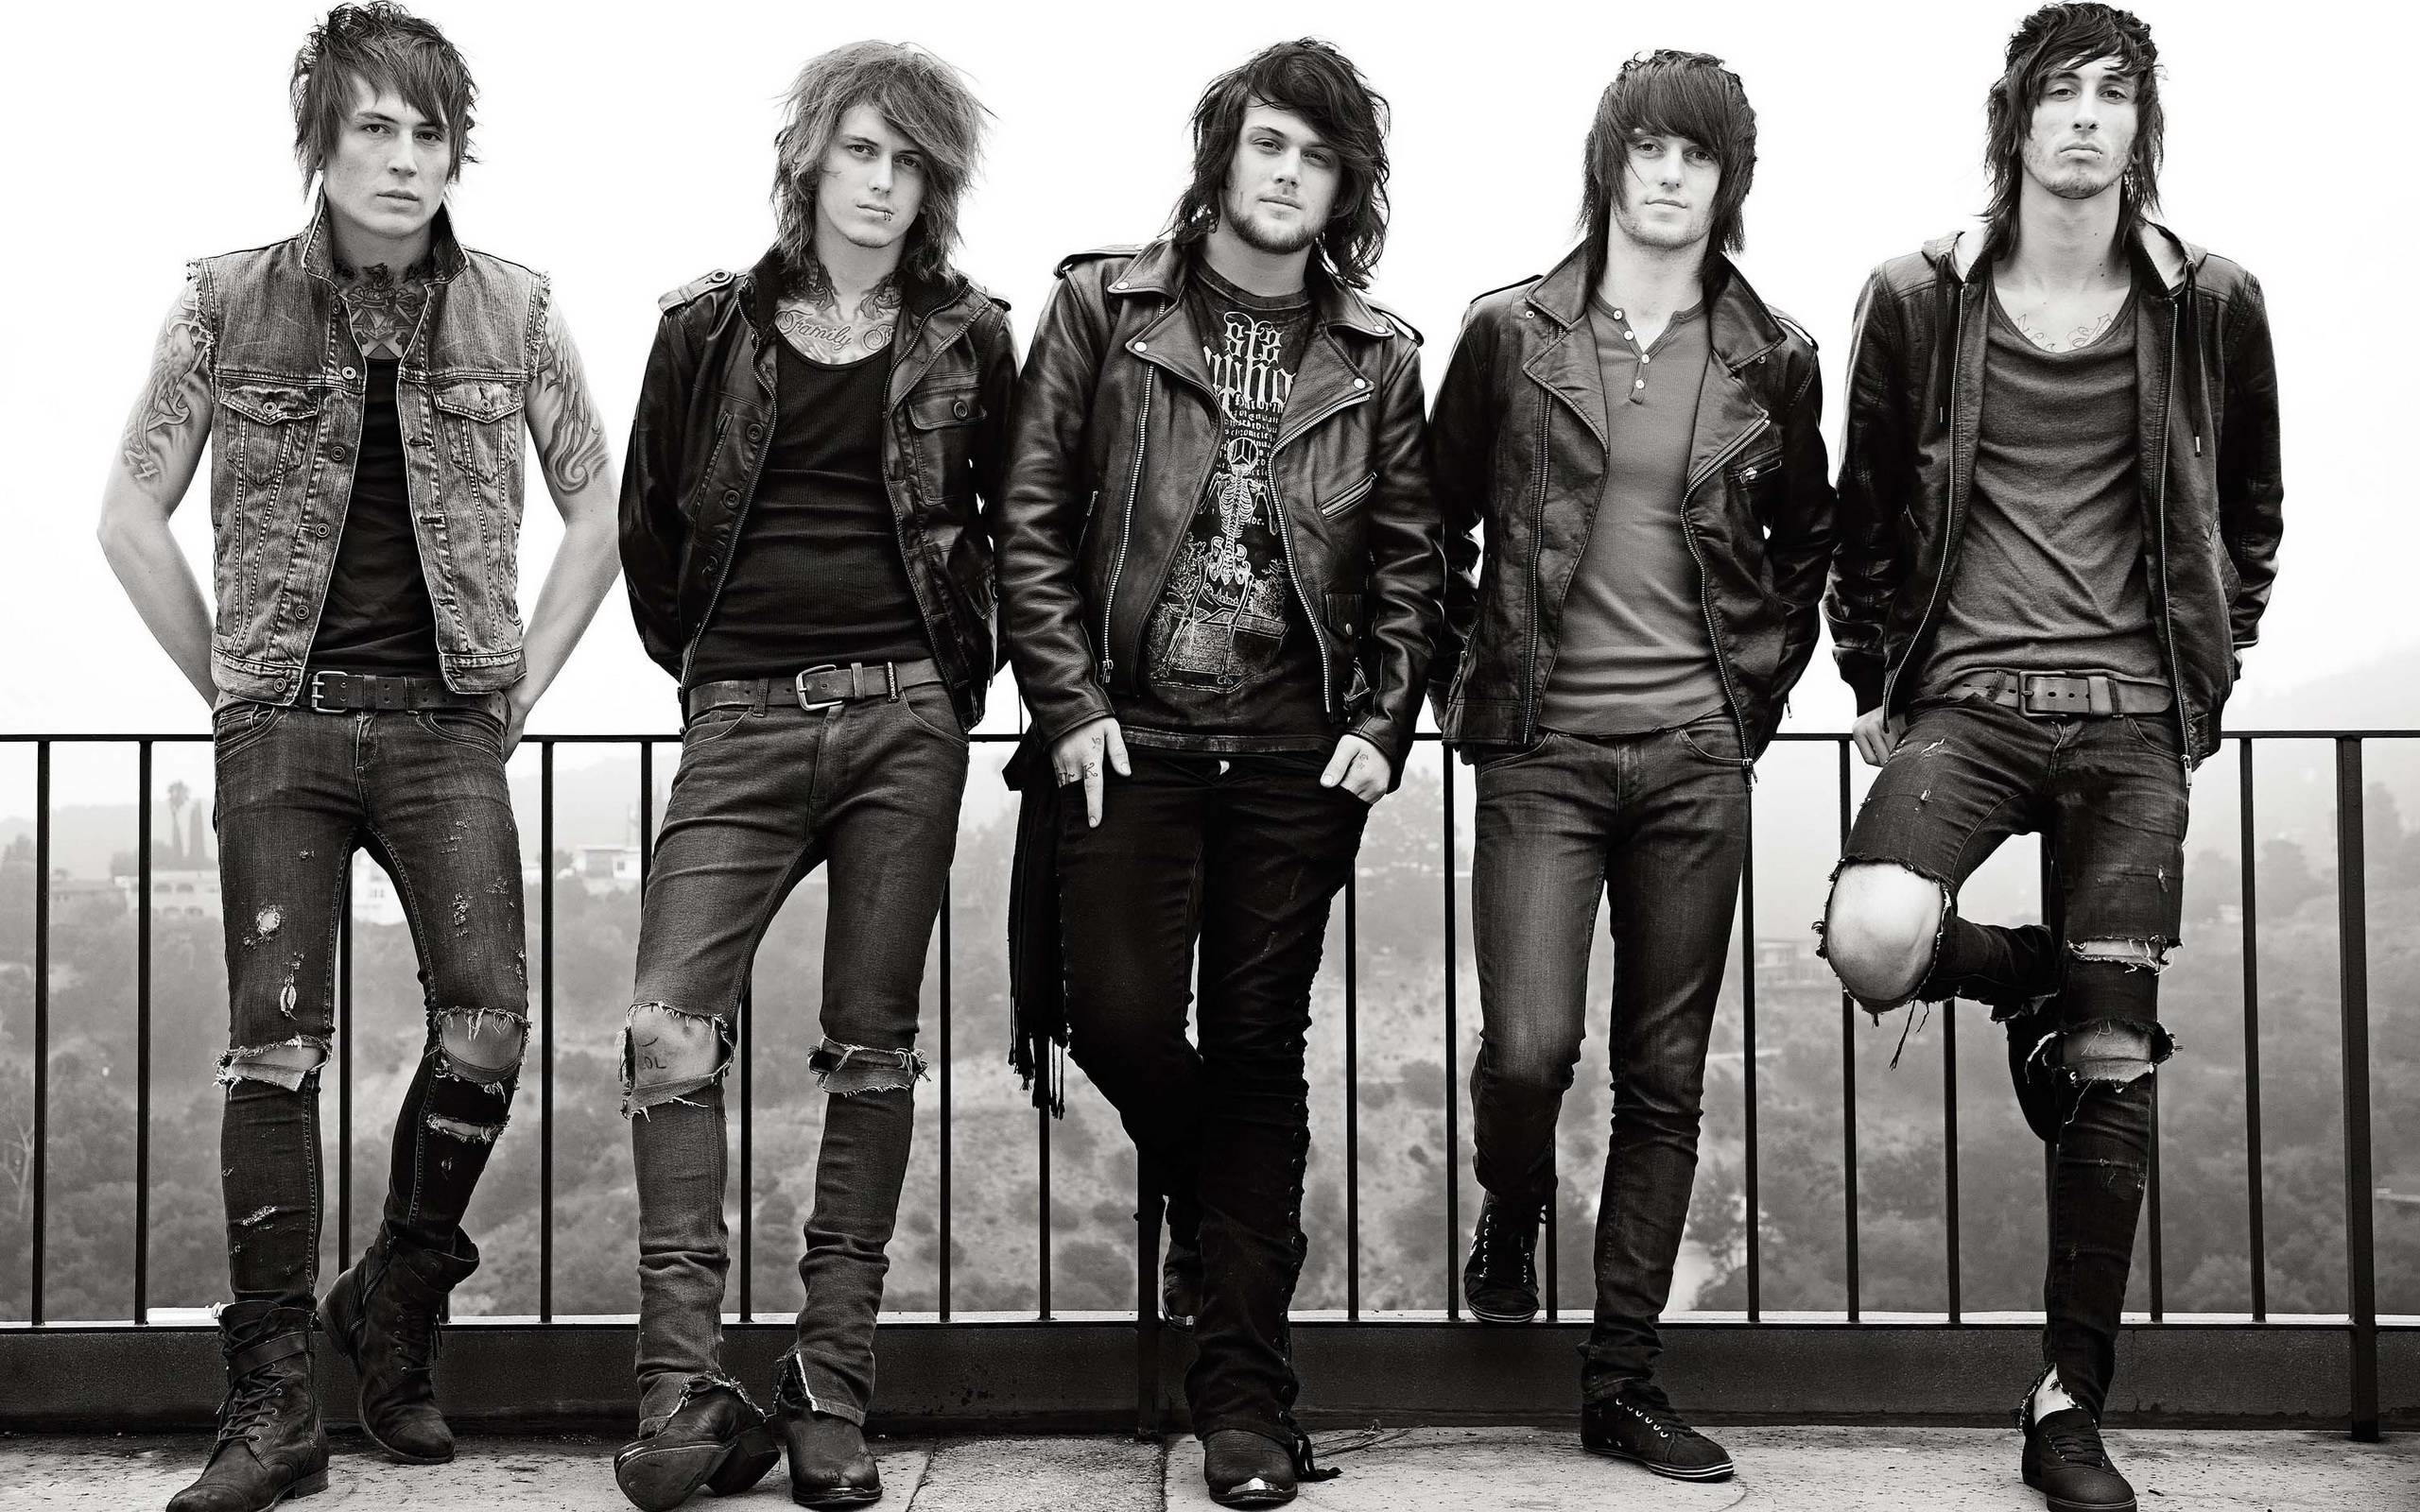 2560x1600 Asking Alexandria wallpapers and images - wallpapers, pictures, photos